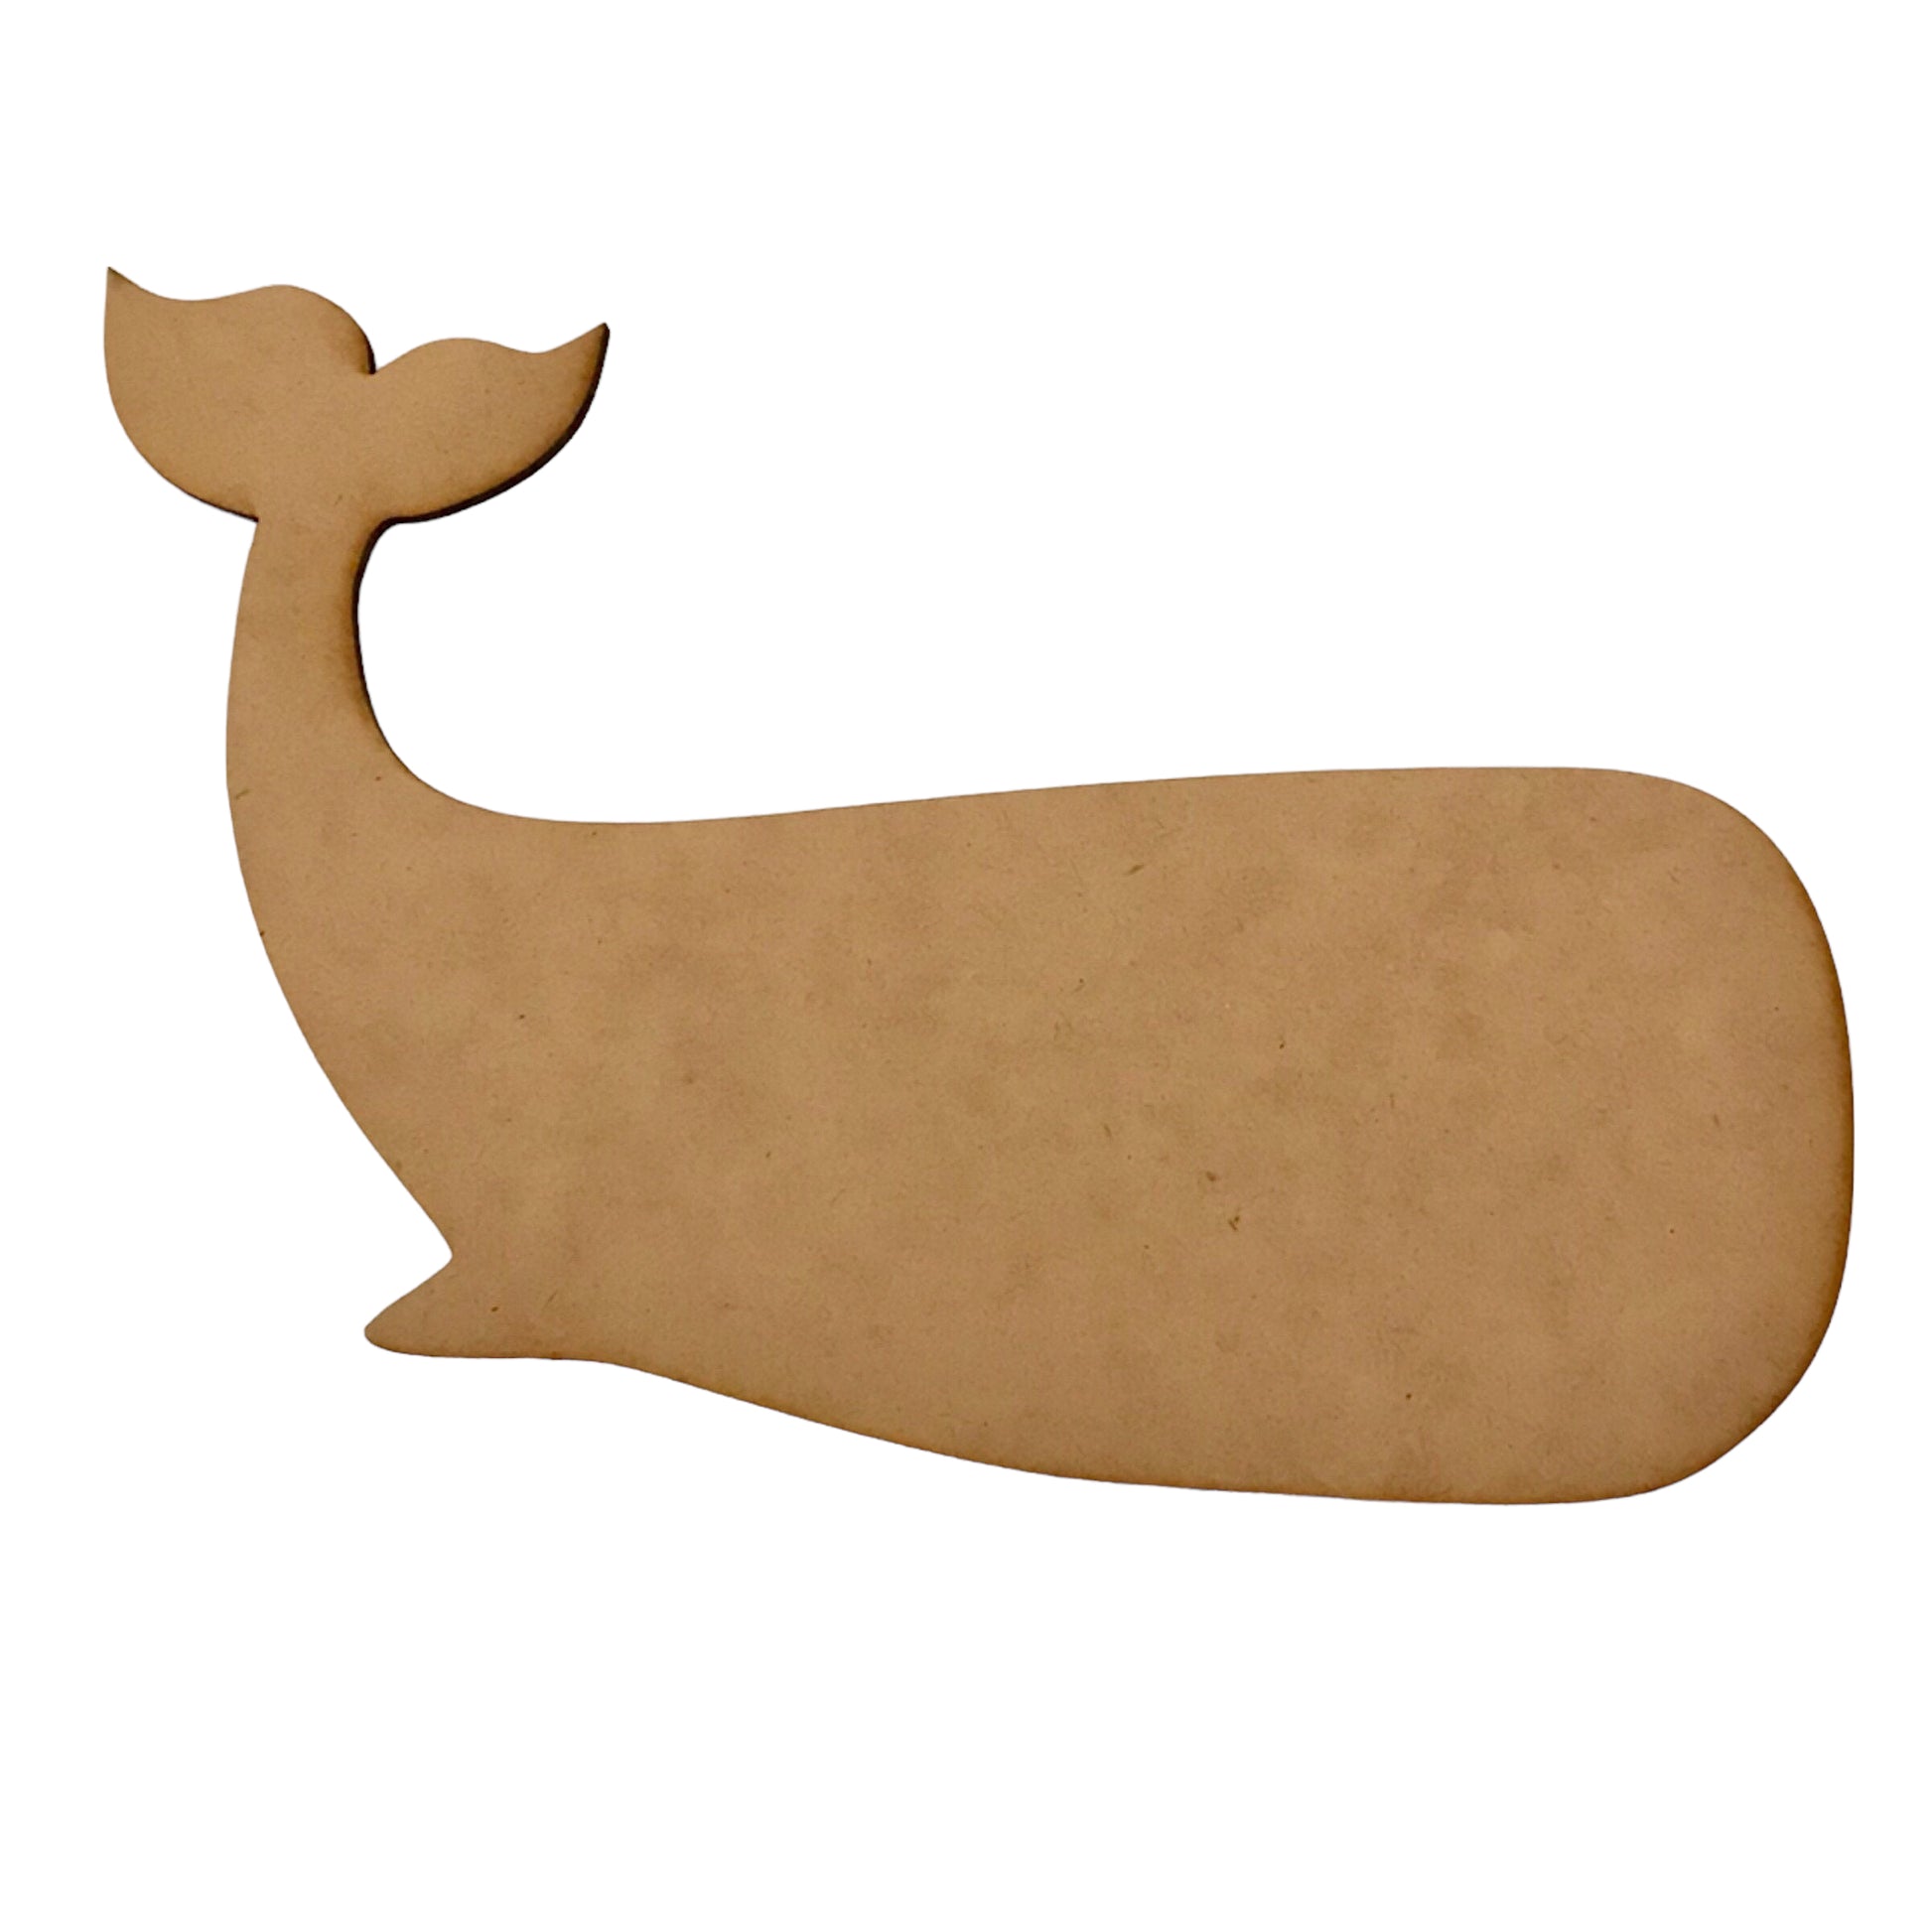 Whale Ocean Fish Beach House Wooden Raw MDF DIY Craft - The Renmy Store Homewares & Gifts 